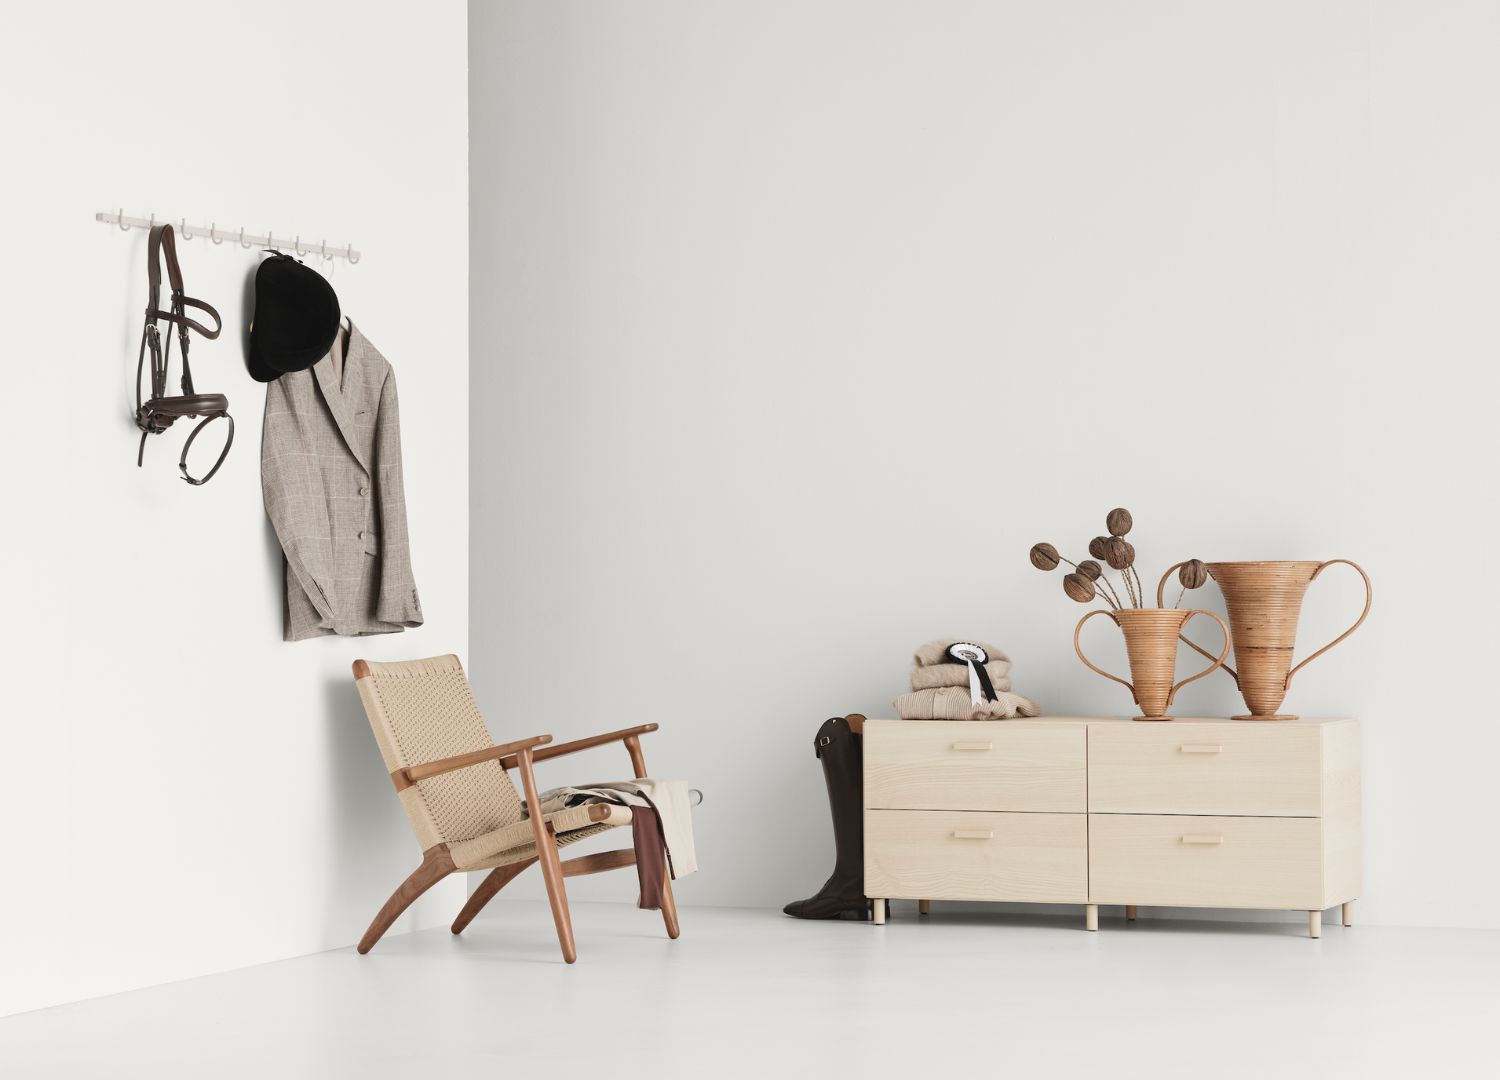 Relief collection _ modular furniture system by TAF studio for String Furniture